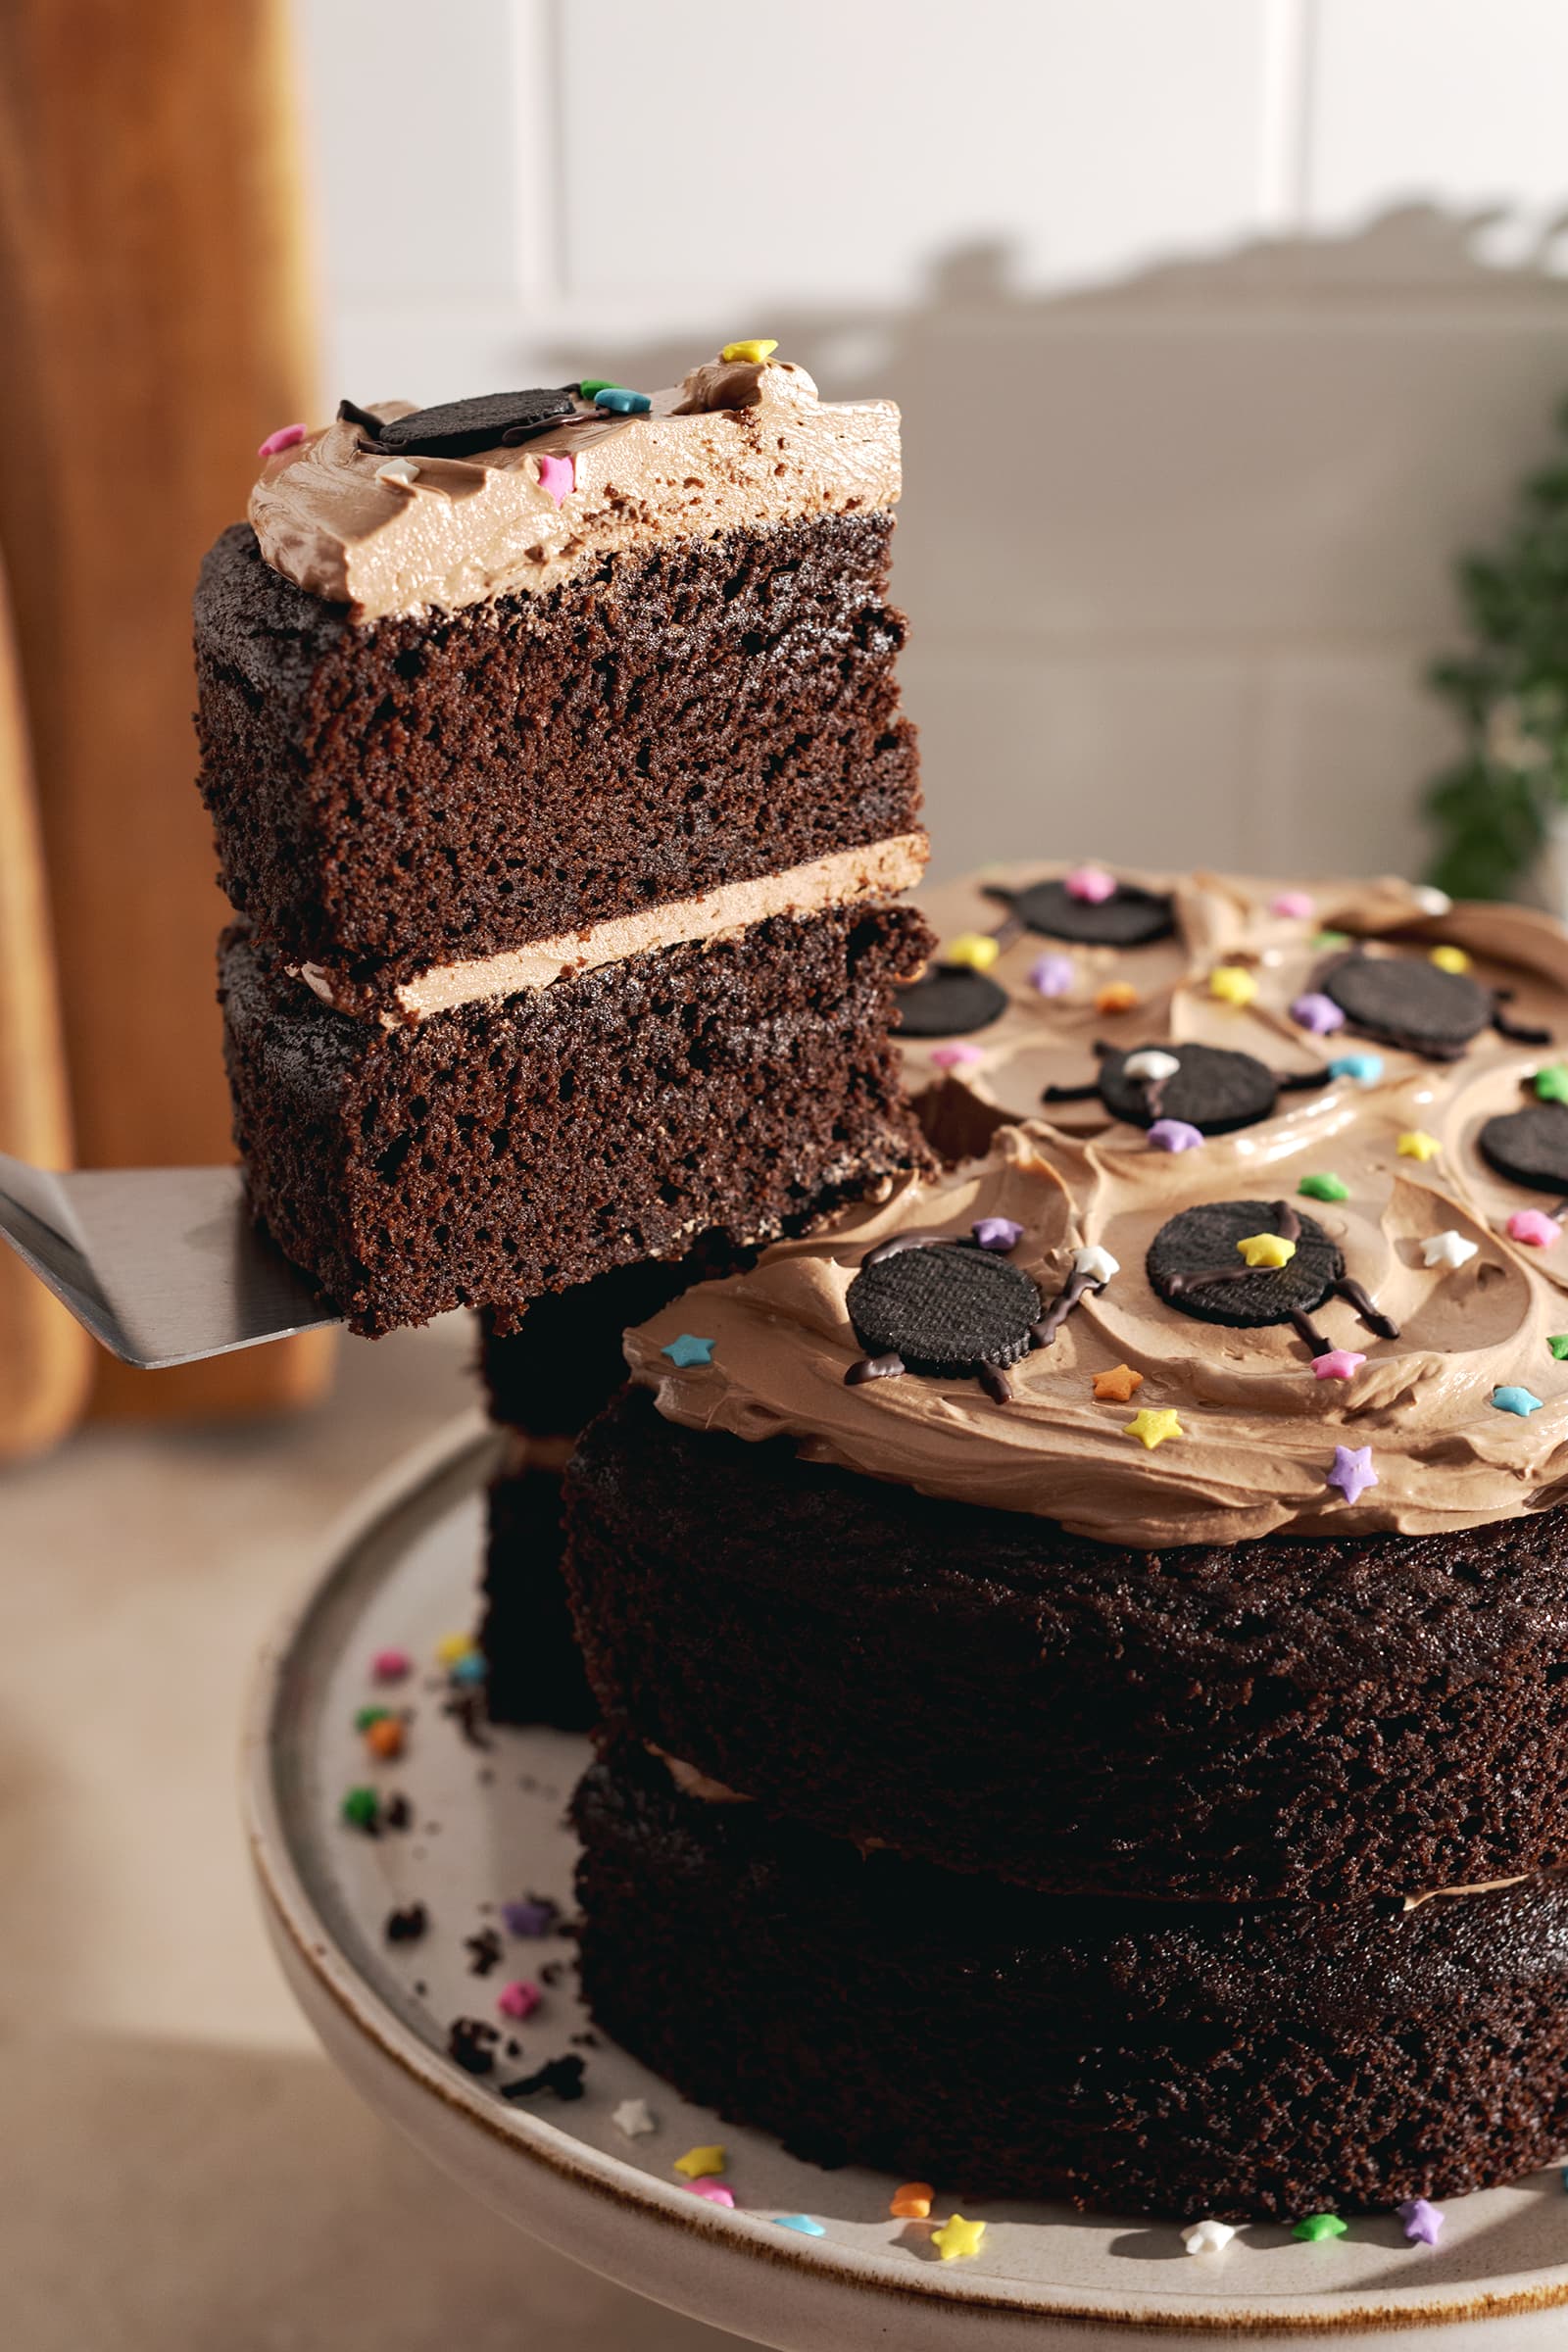 Lifting a slice of chocolate cake with a cake server from the rest of the cake.